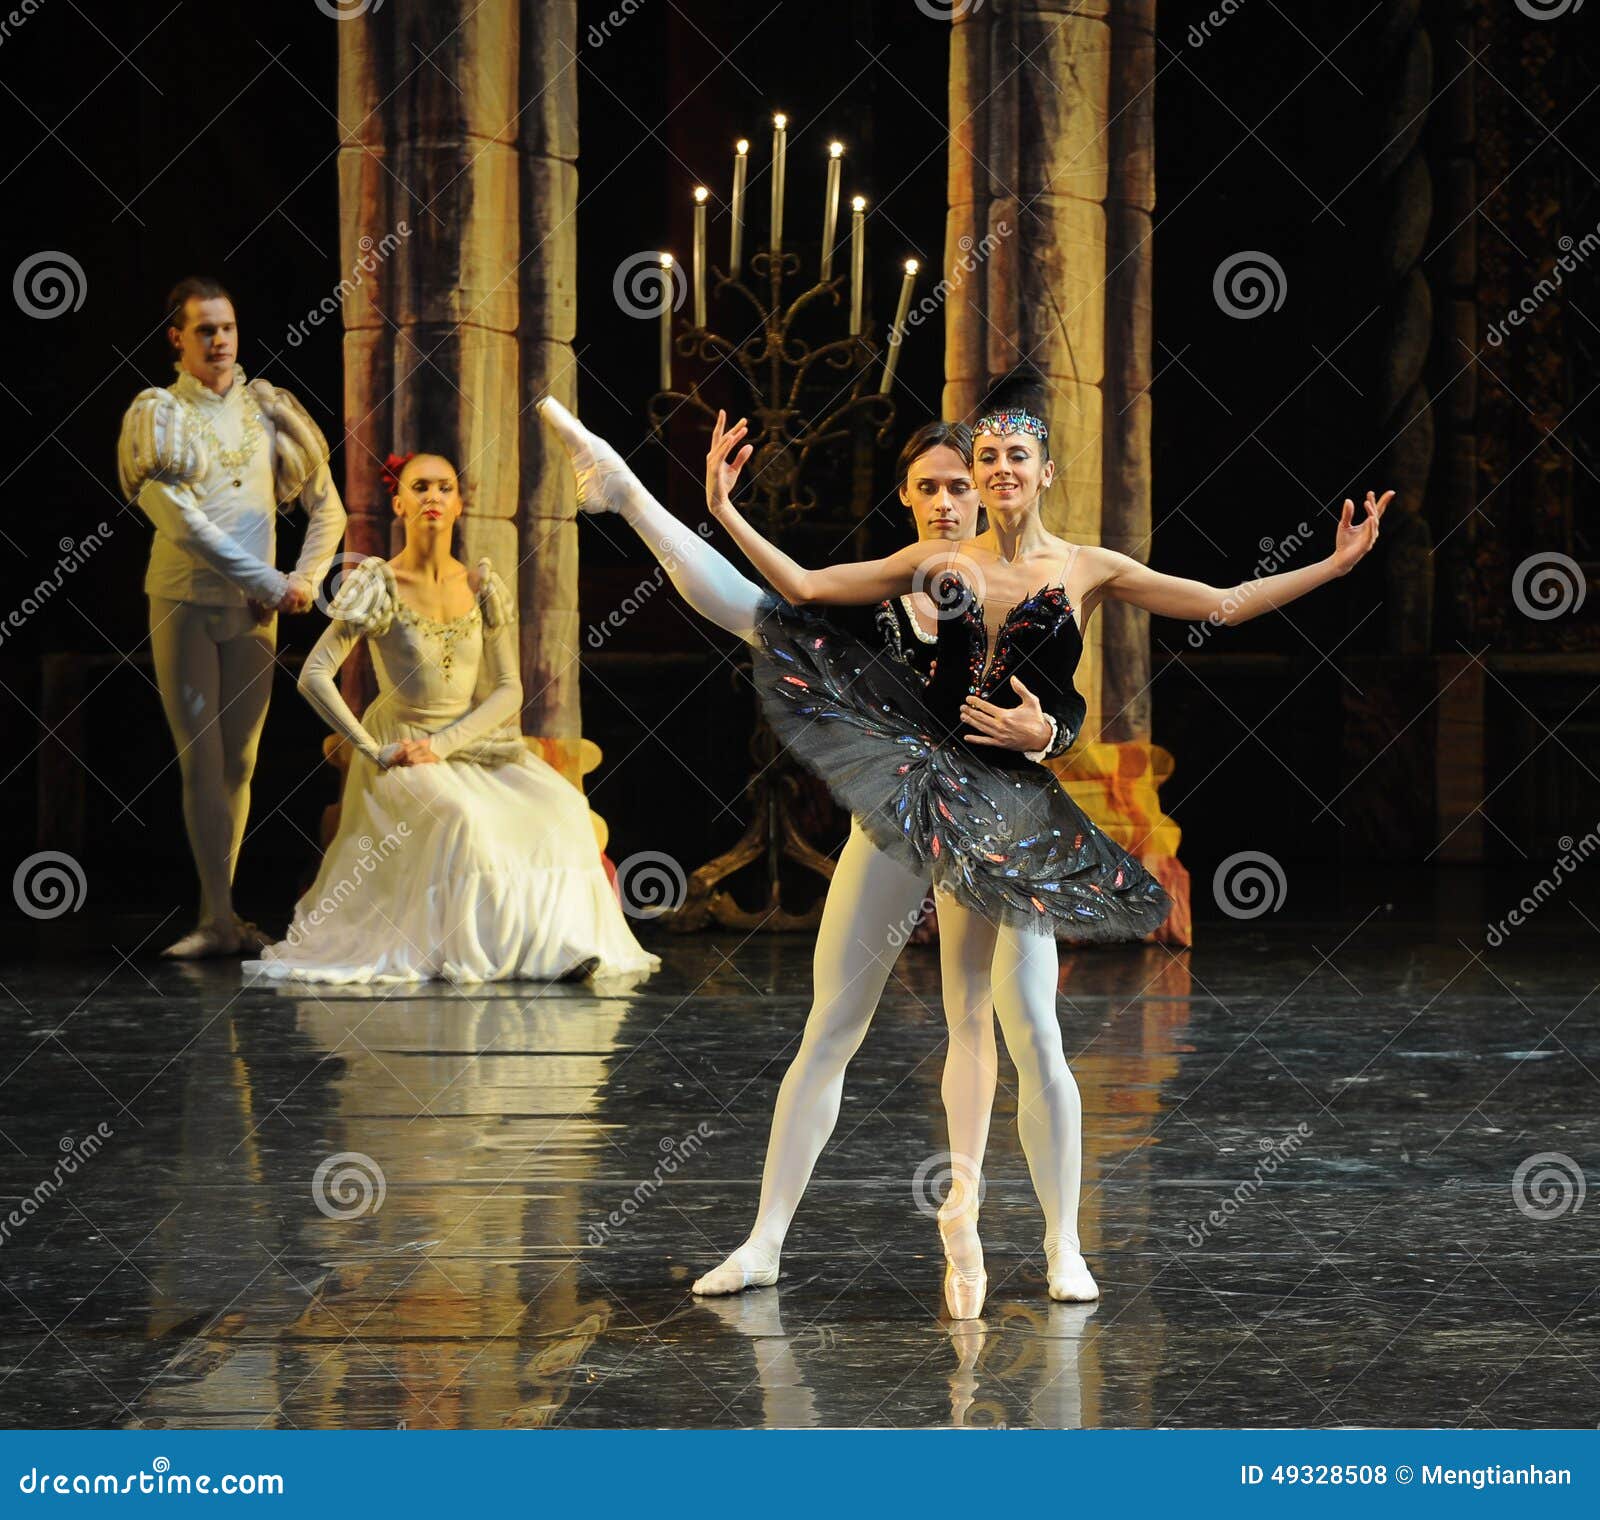 indrømme frynser At sige sandheden Siegfried and Black Swan Dance-the Prince Adult Ceremony-ballet Swan Lake  Editorial Stock Photo - Image of excellent, embrace: 49328508